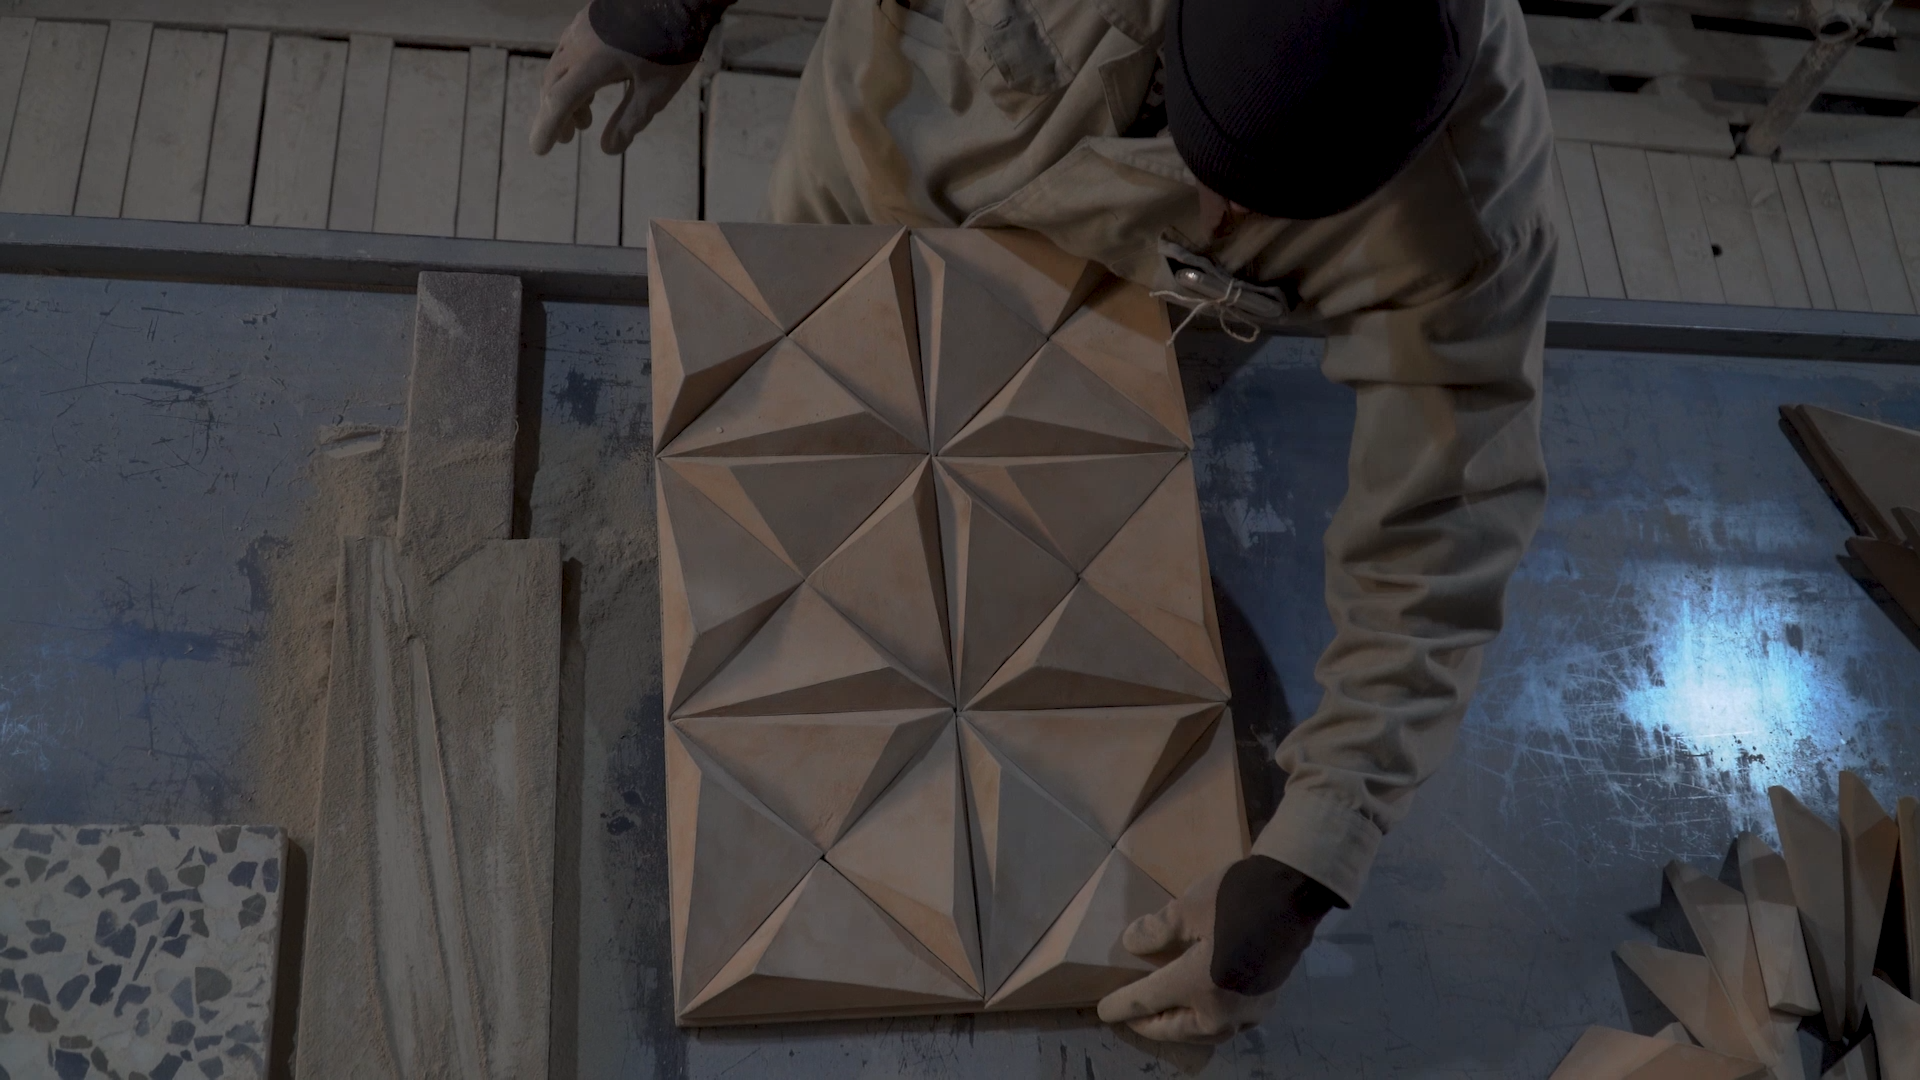 A short film highlighting the tile-making process at the Jangalak Vocational Training Centre in Kabul operated by the Aga Khan Cultural Service-Afghanistan